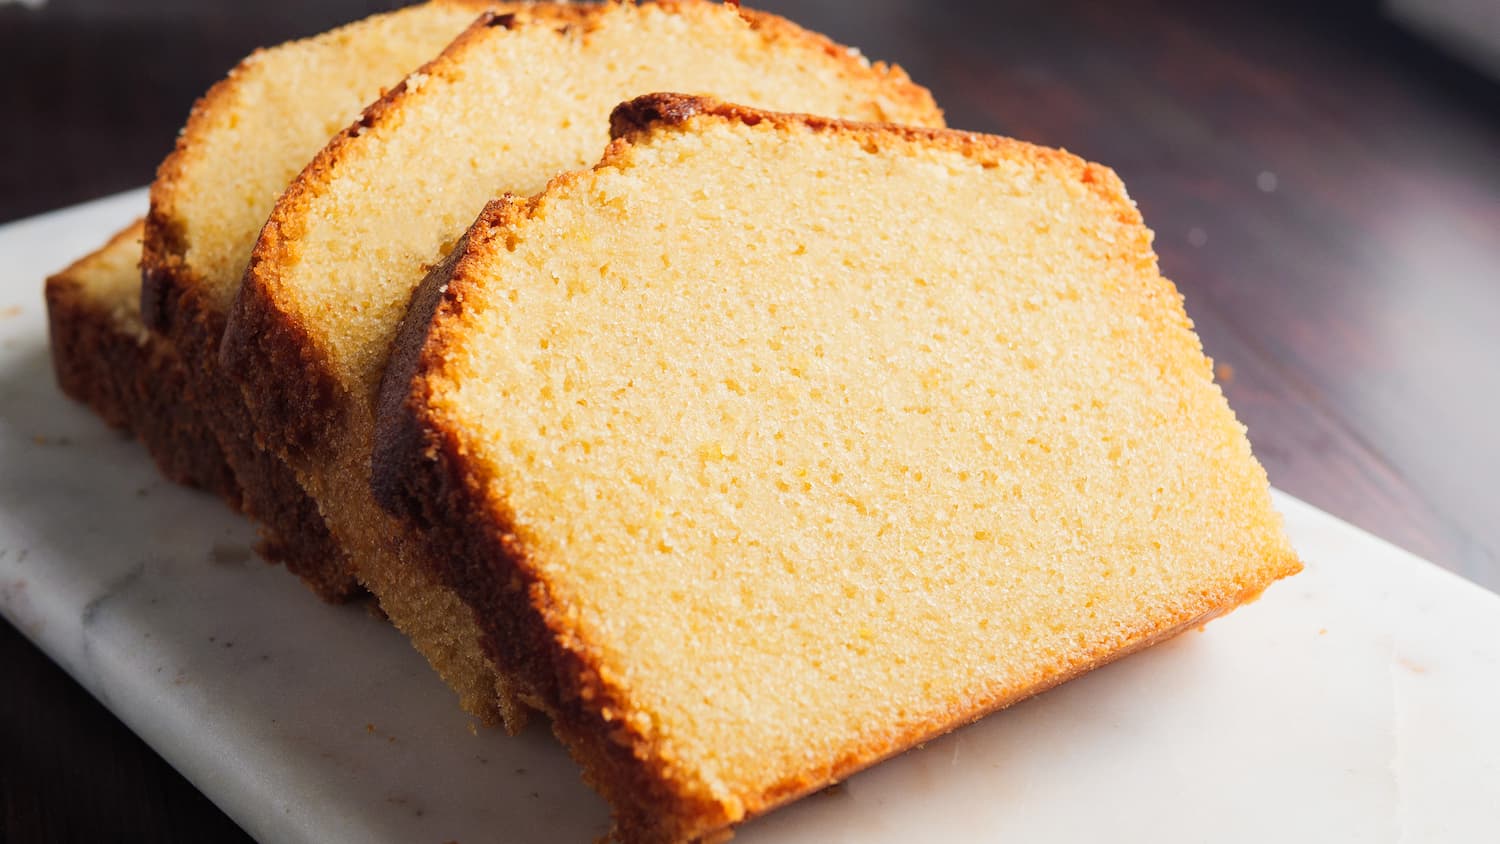 slices of pound cake on a tray